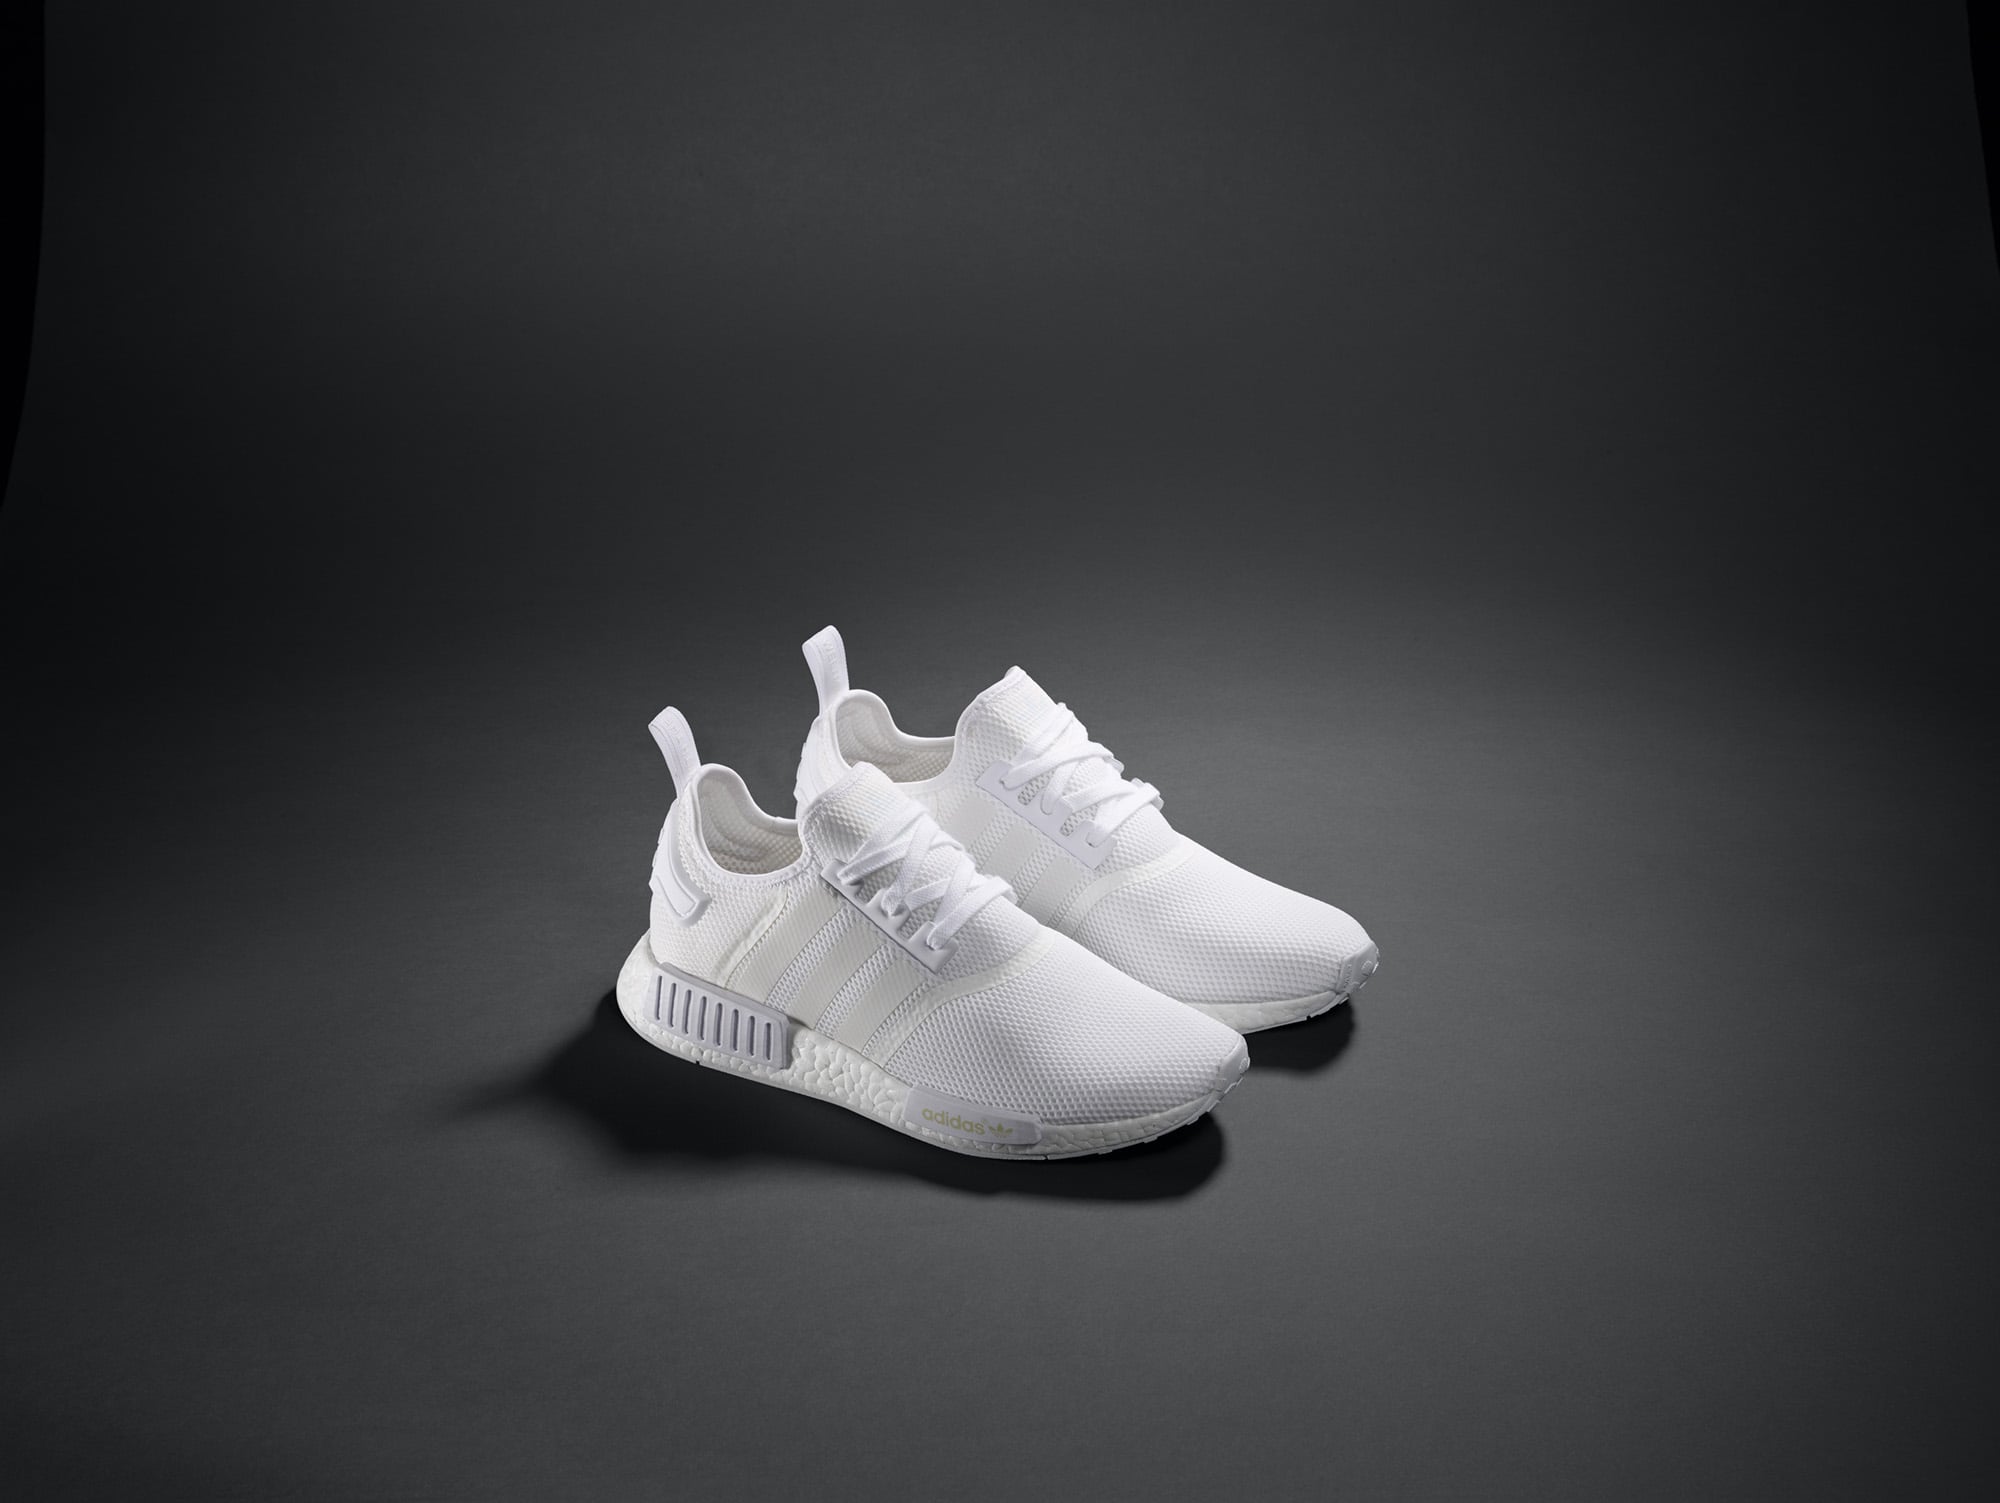 New Adidas Triple White NMD Sneakers 